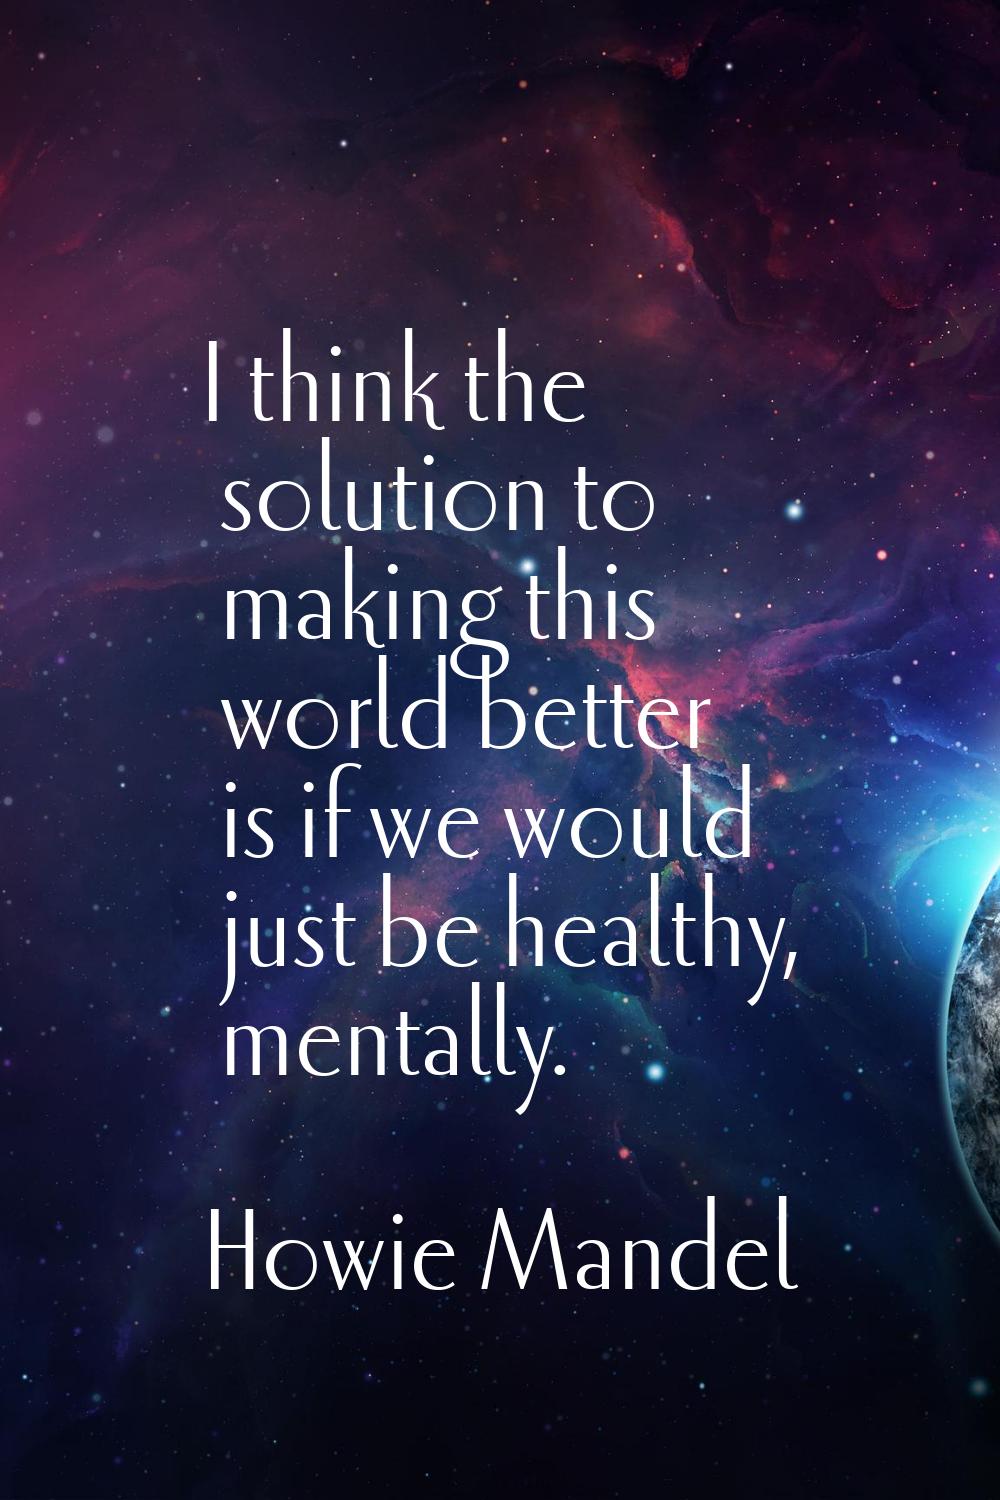 I think the solution to making this world better is if we would just be healthy, mentally.